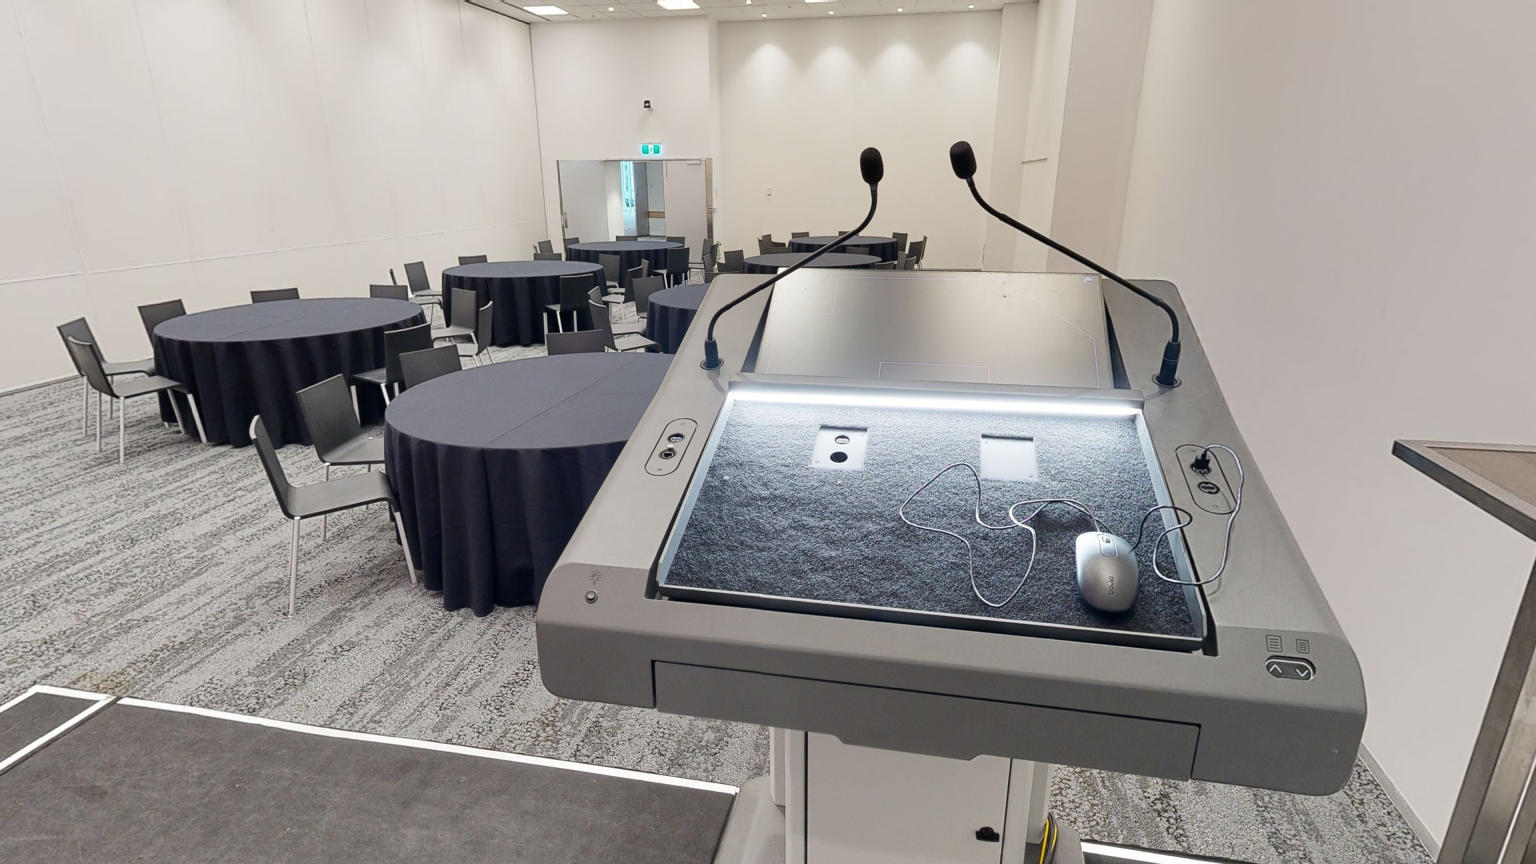 A professional conference or meeting room with neatly arranged round tables and chairs. A lectern and stage sit to the side of the room facing out towards the tables. 